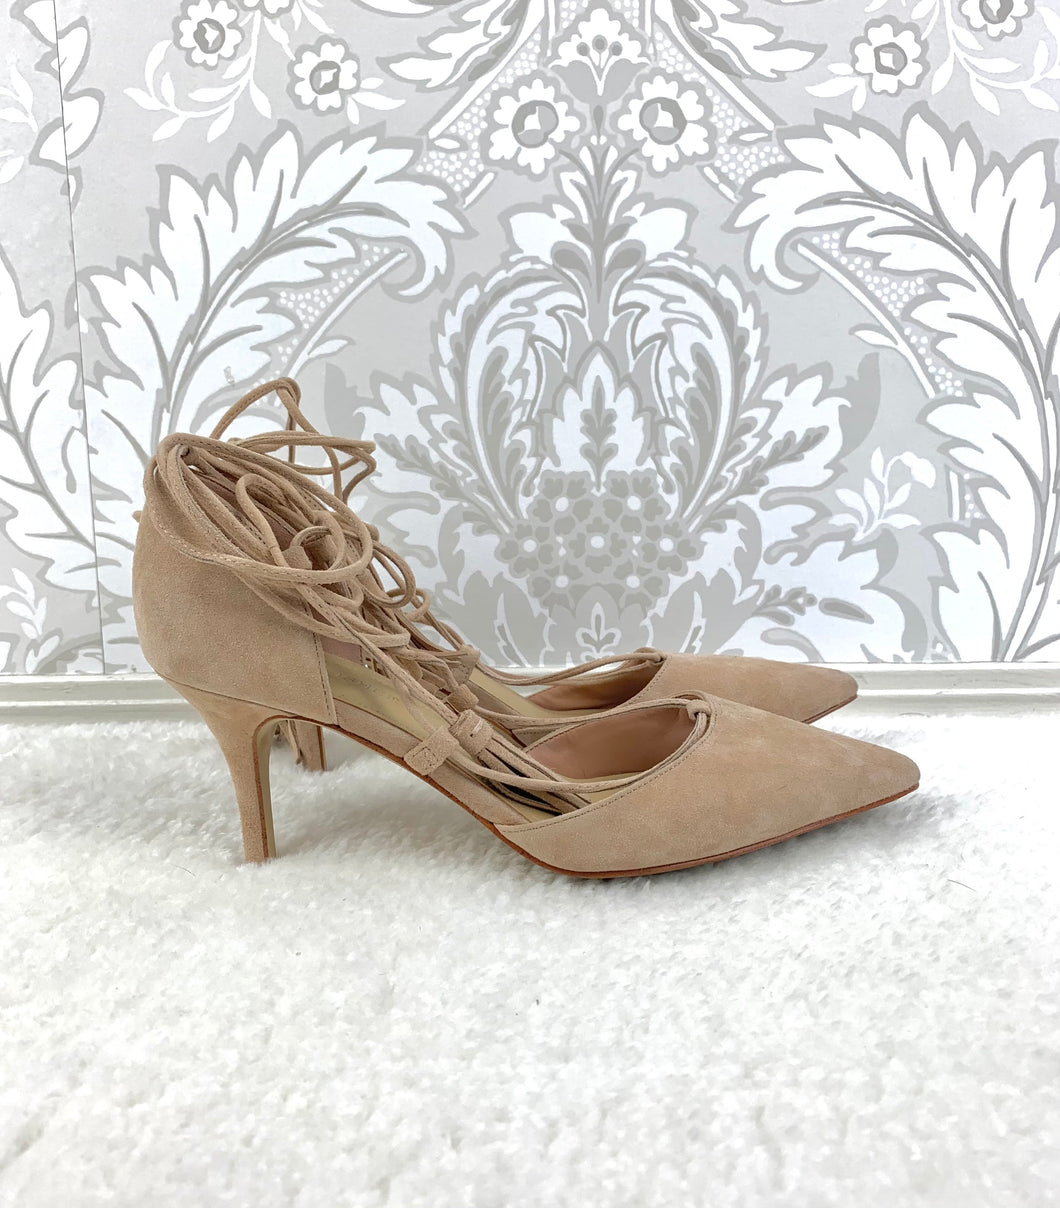 Marc Fisher Suede Pumps size 7.5